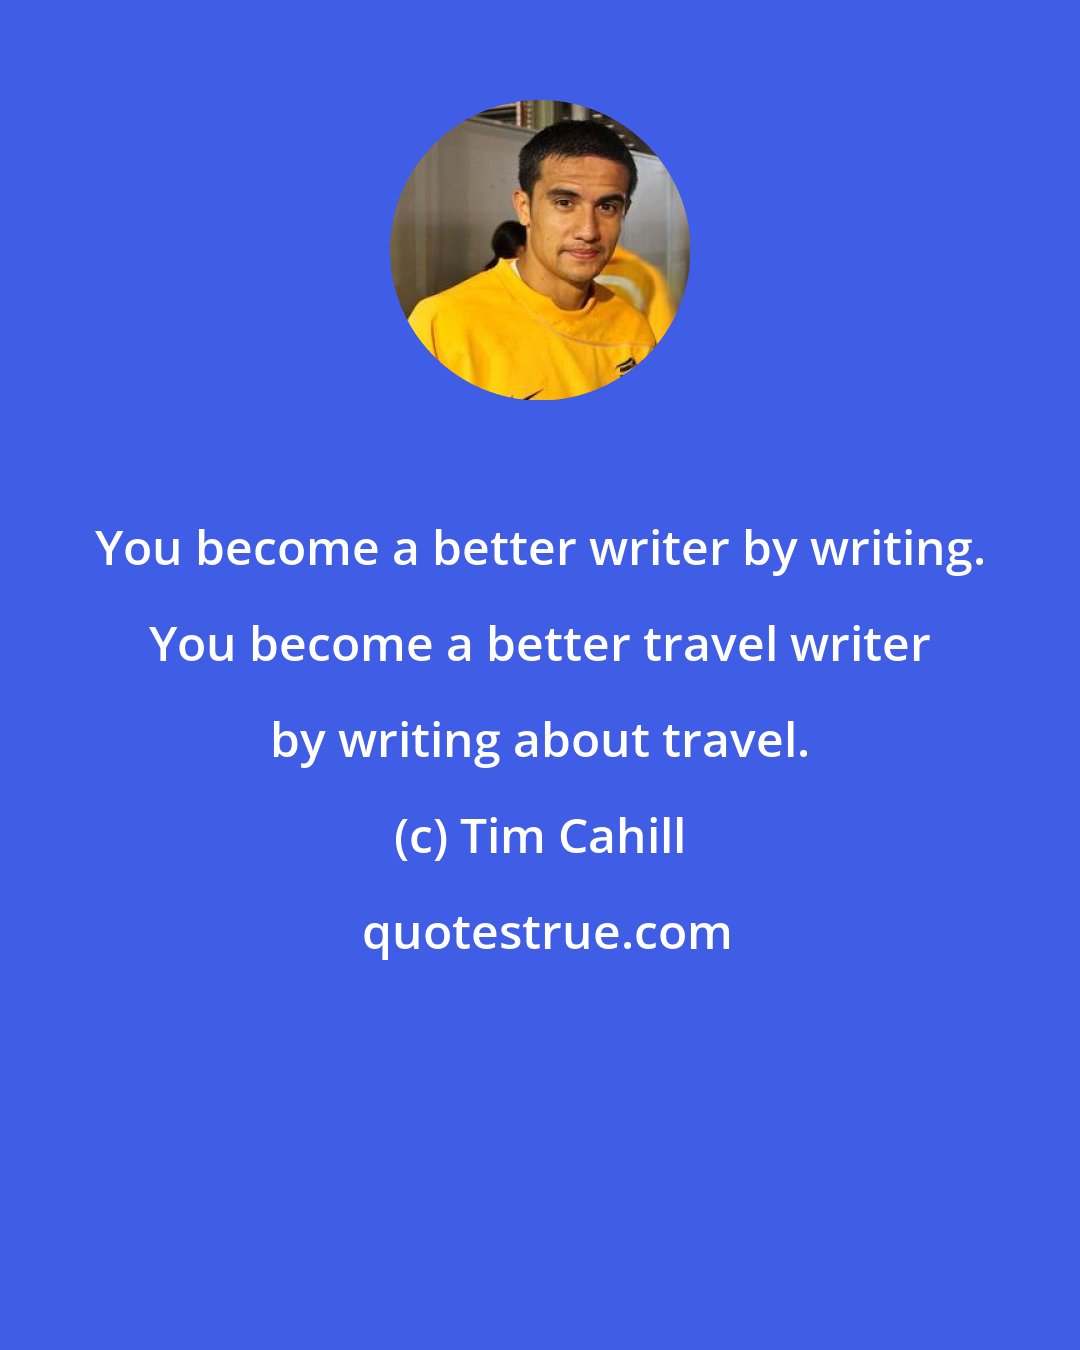 Tim Cahill: You become a better writer by writing. You become a better travel writer by writing about travel.